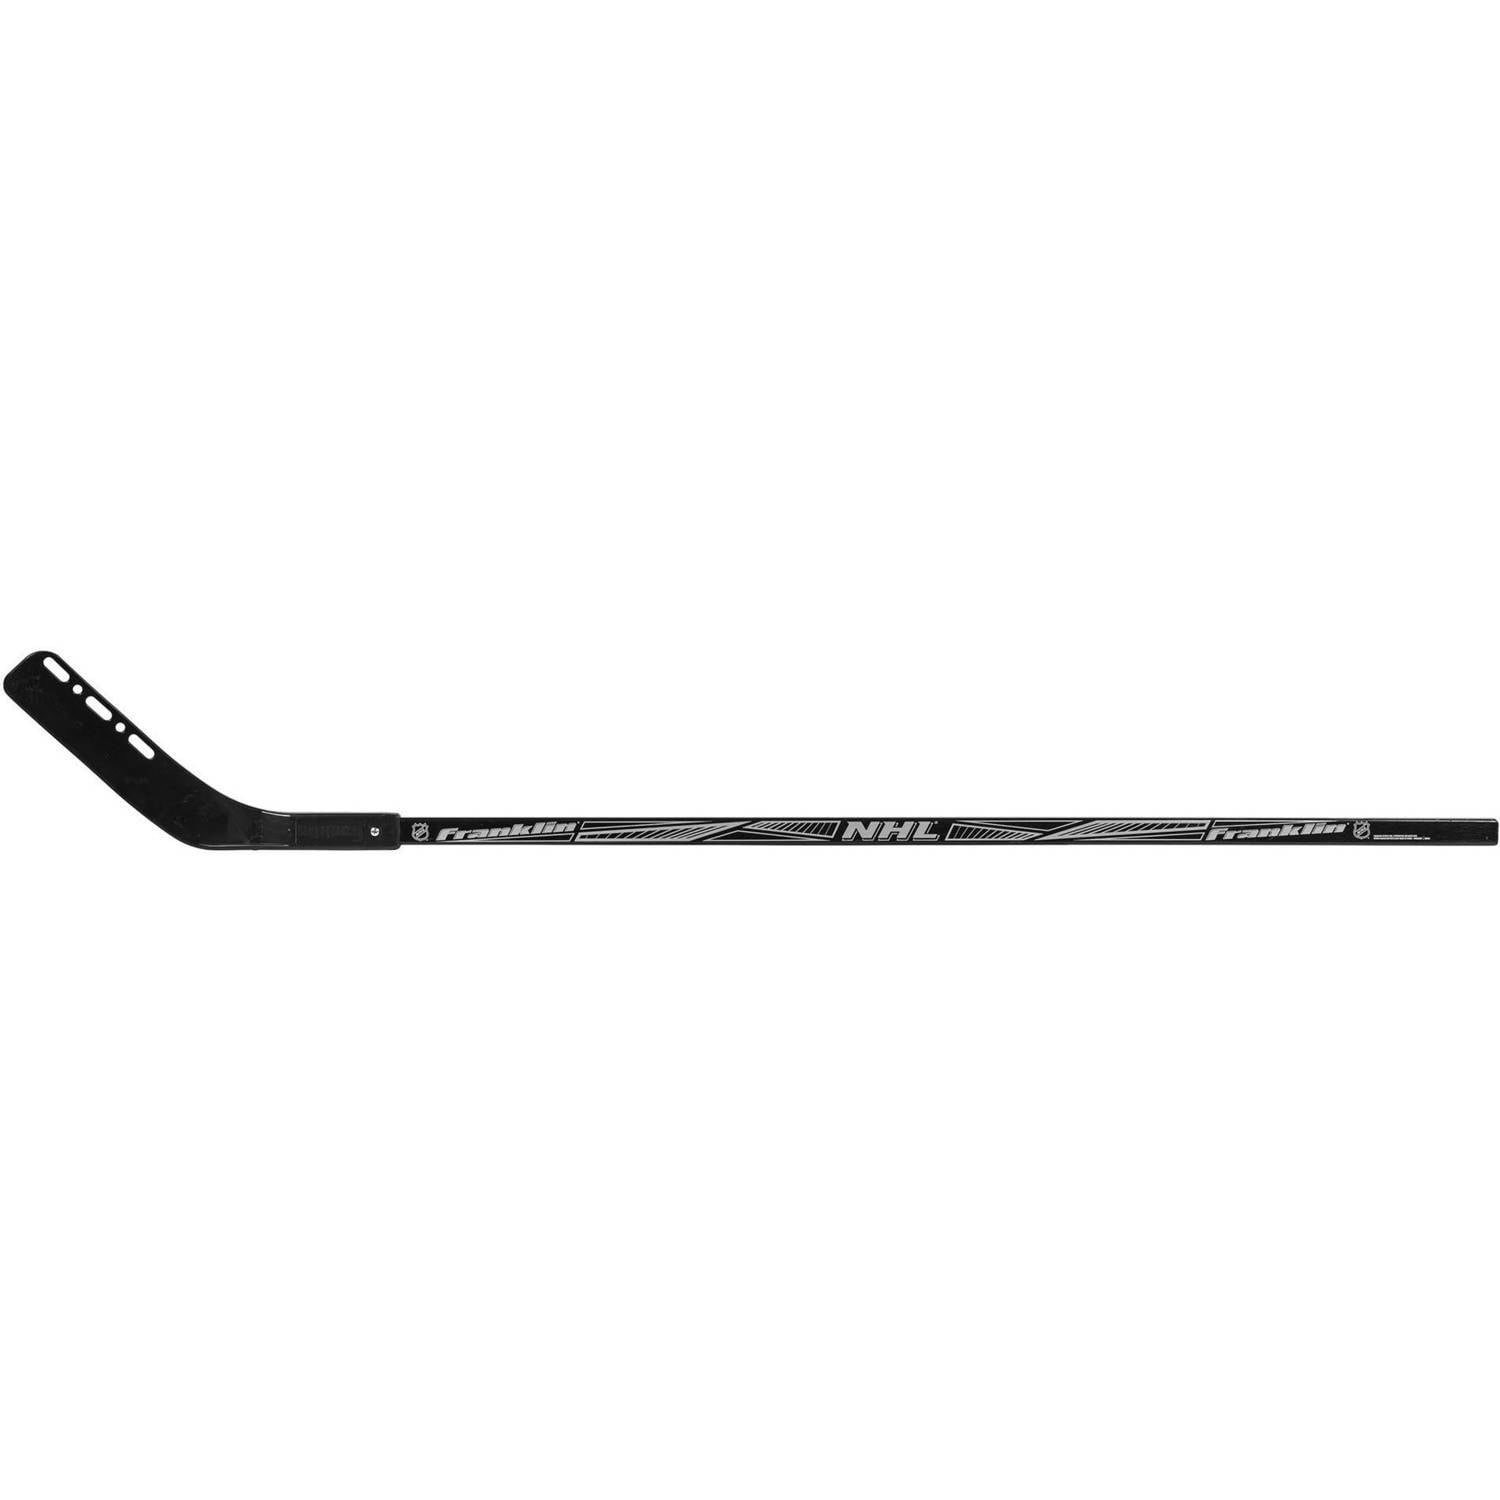 Senior Composite Hockey Shafts $25 Each OBO Add A Blade And Have A New Stick 